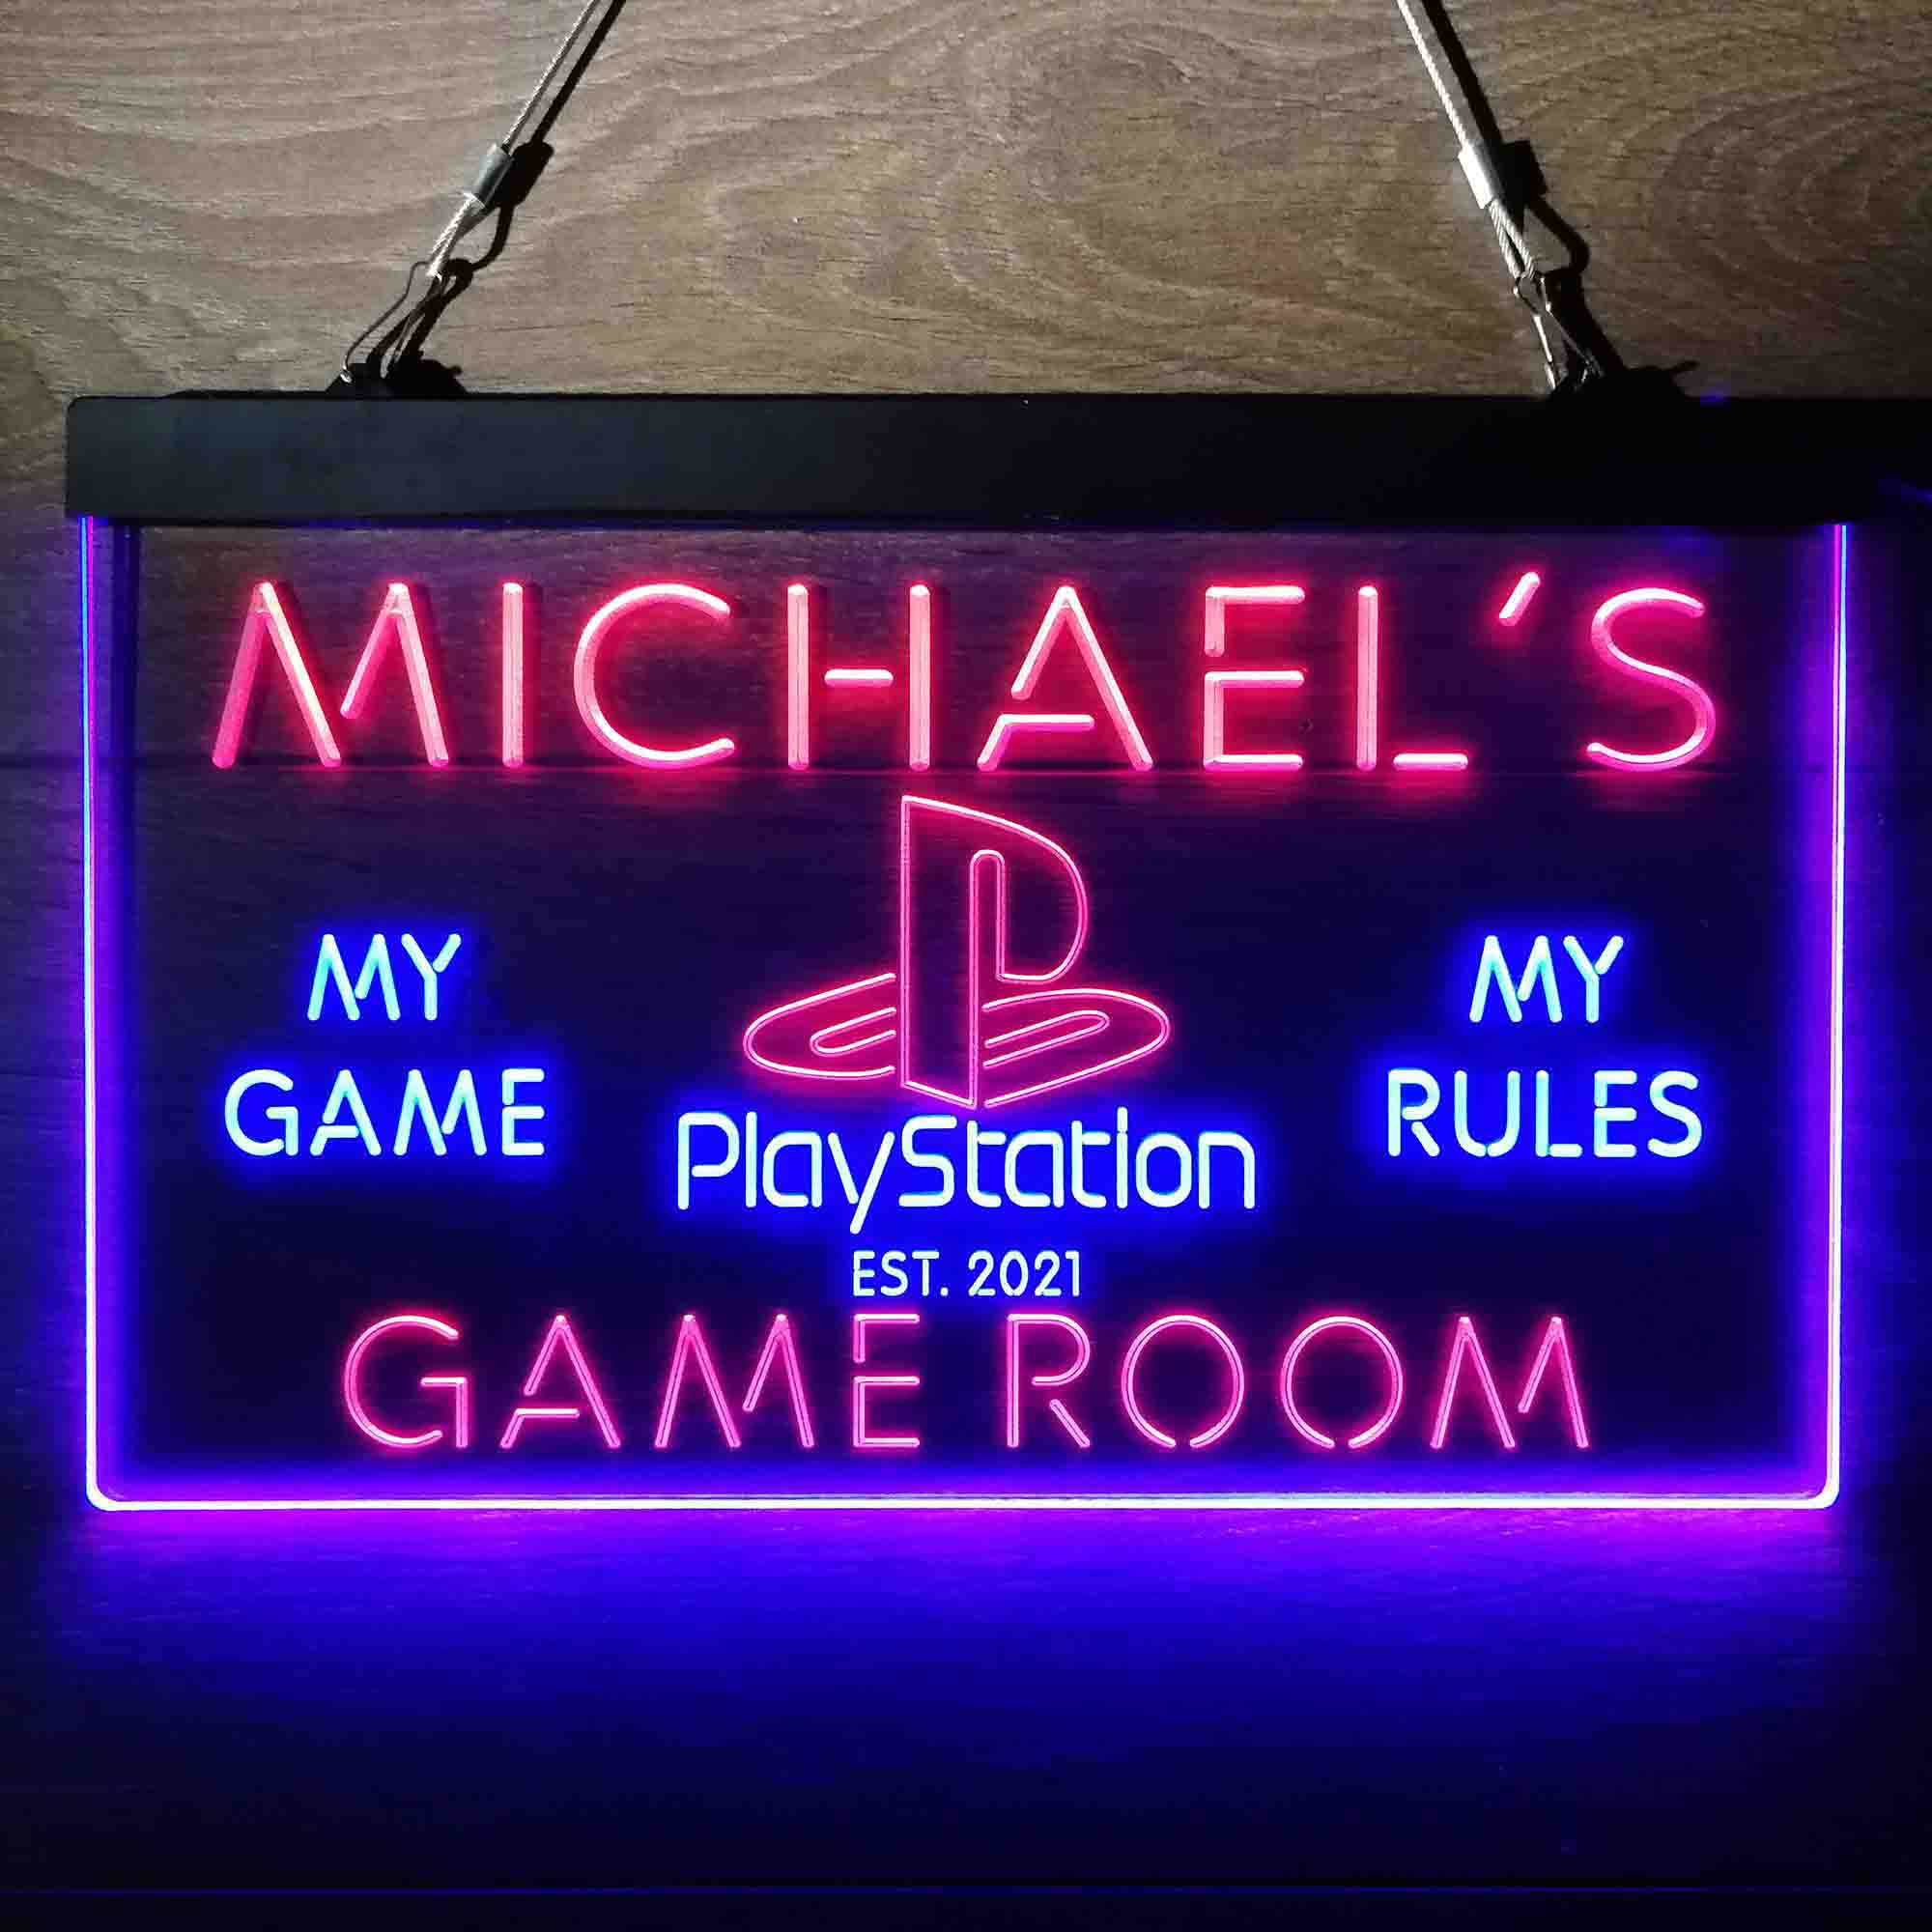 Playstation PS4 Game Room Neon LED Sign | PRO LED SIGN